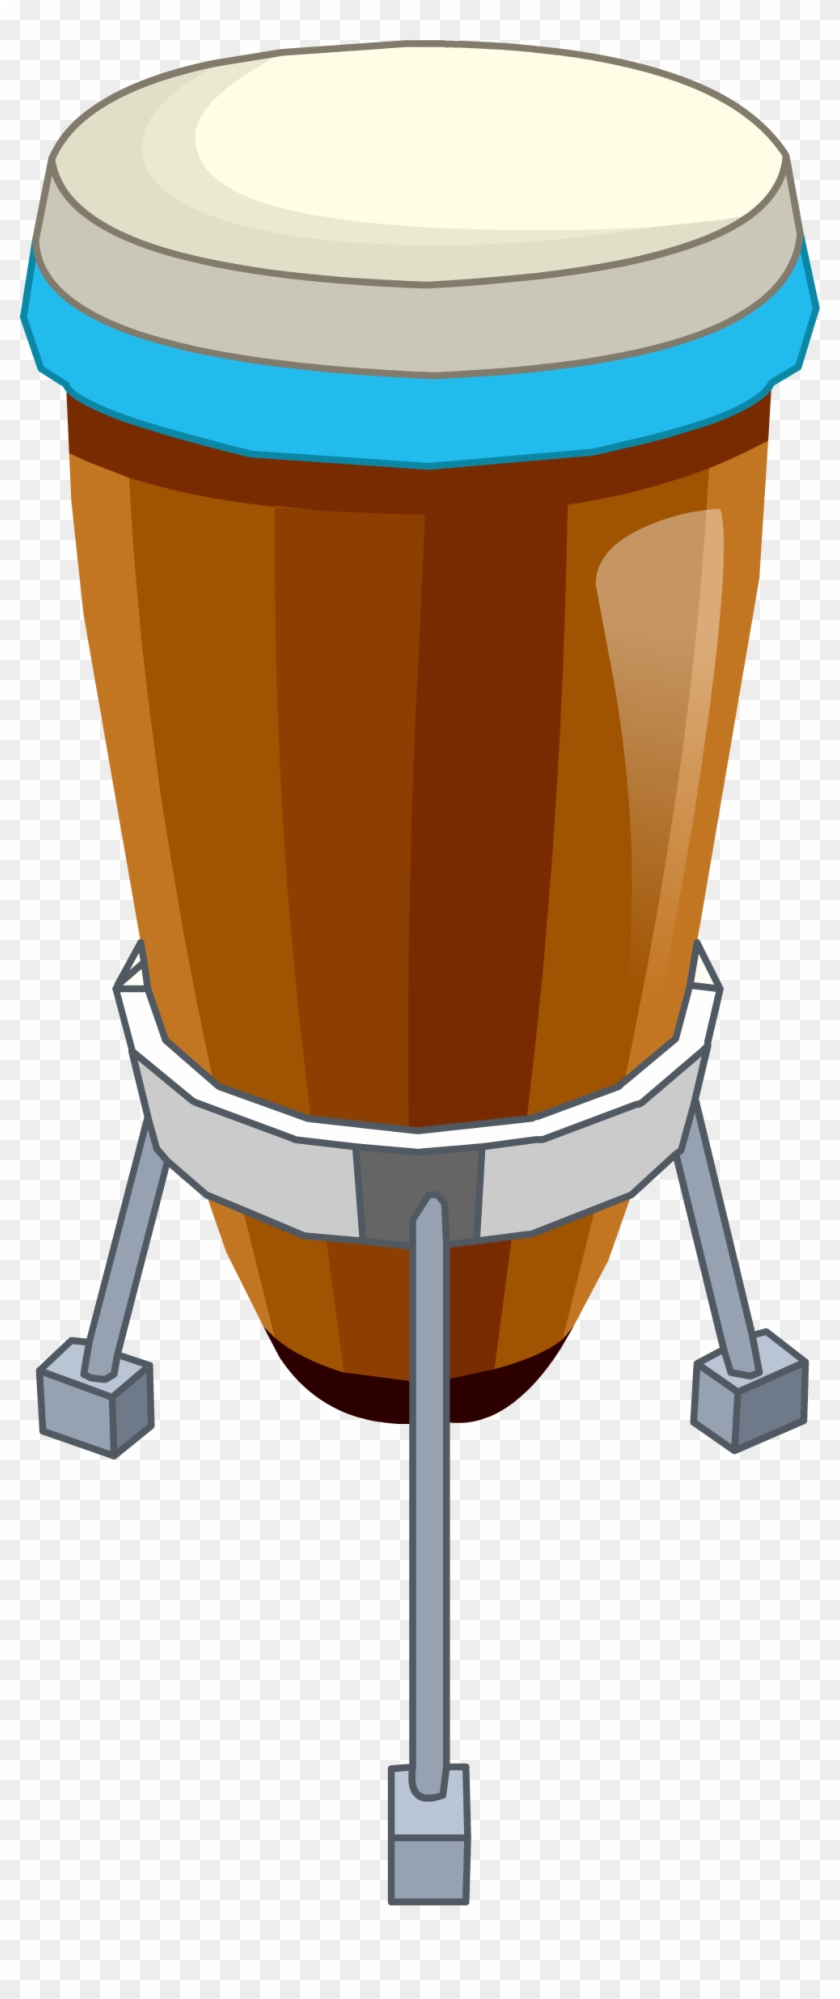 Drum Clipart Conga Drum - Conga Drums Cartoon - Png Download #1295295